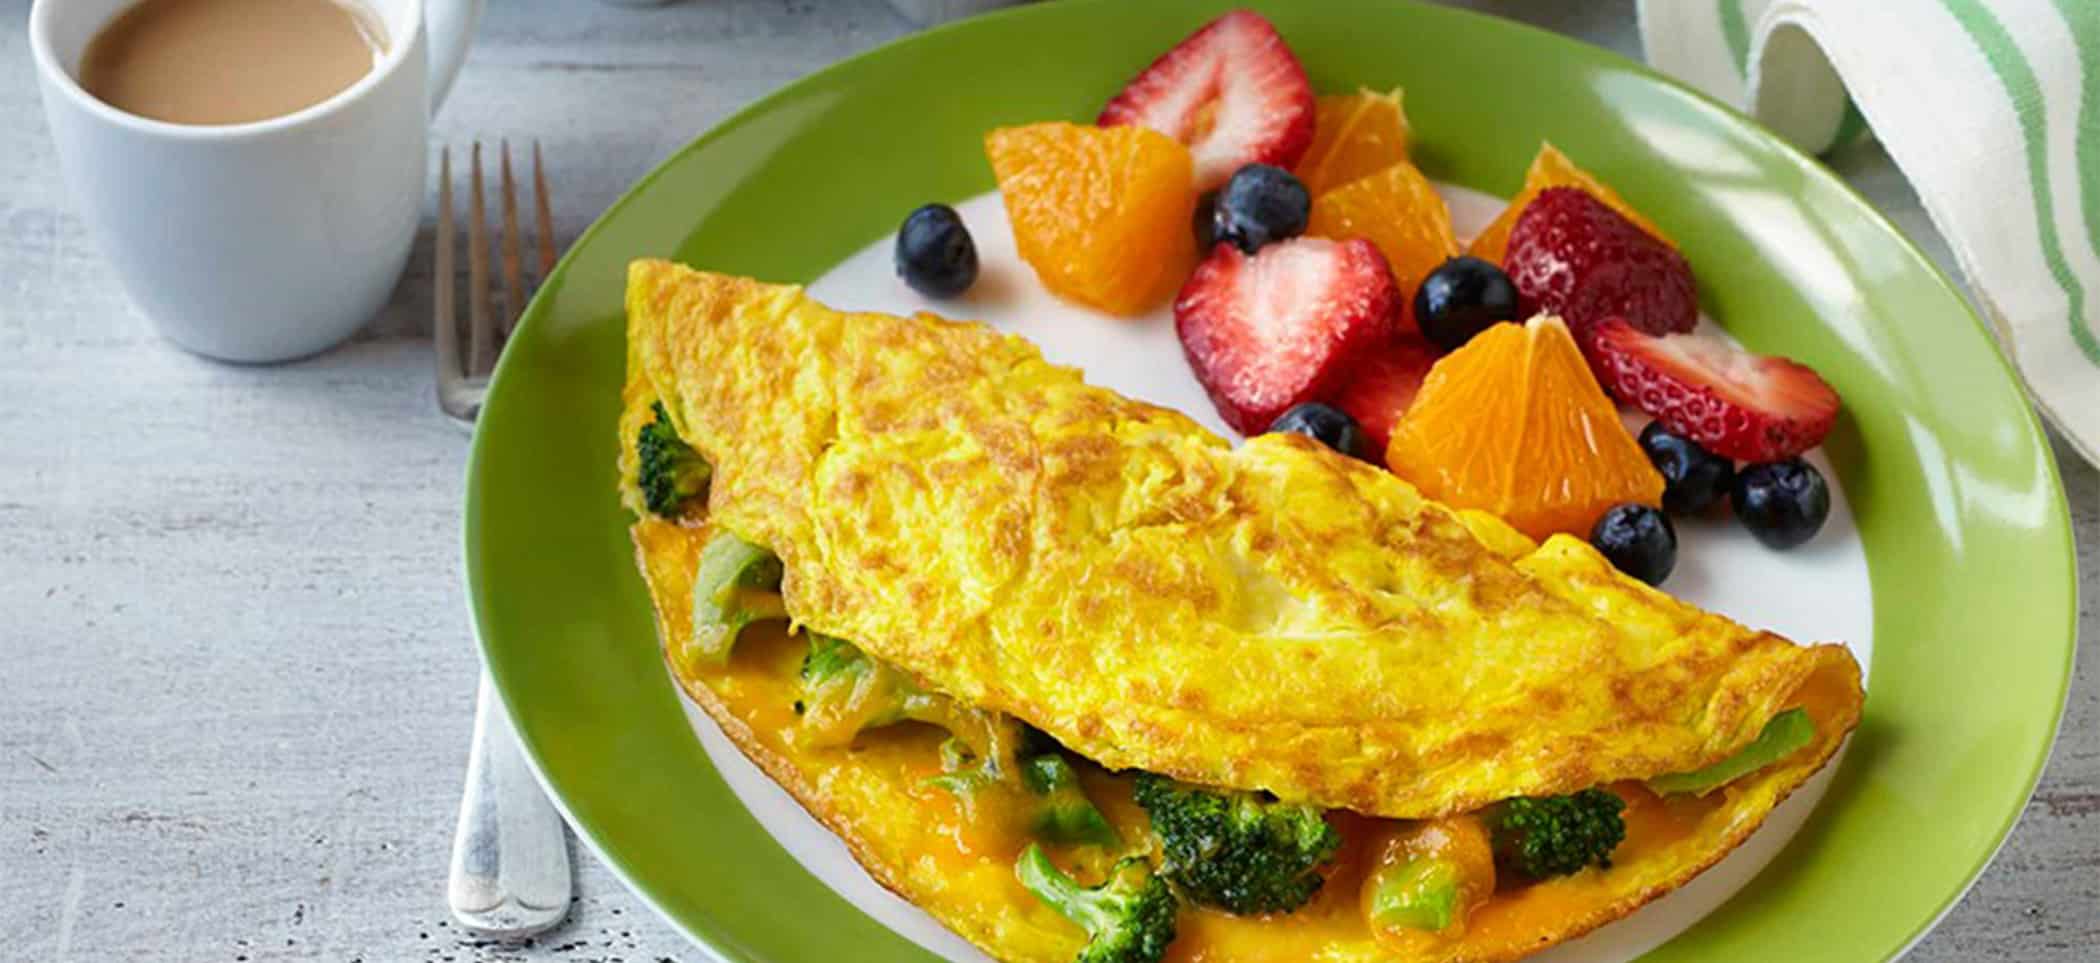 Classic Broccoli & Cheese Omelet